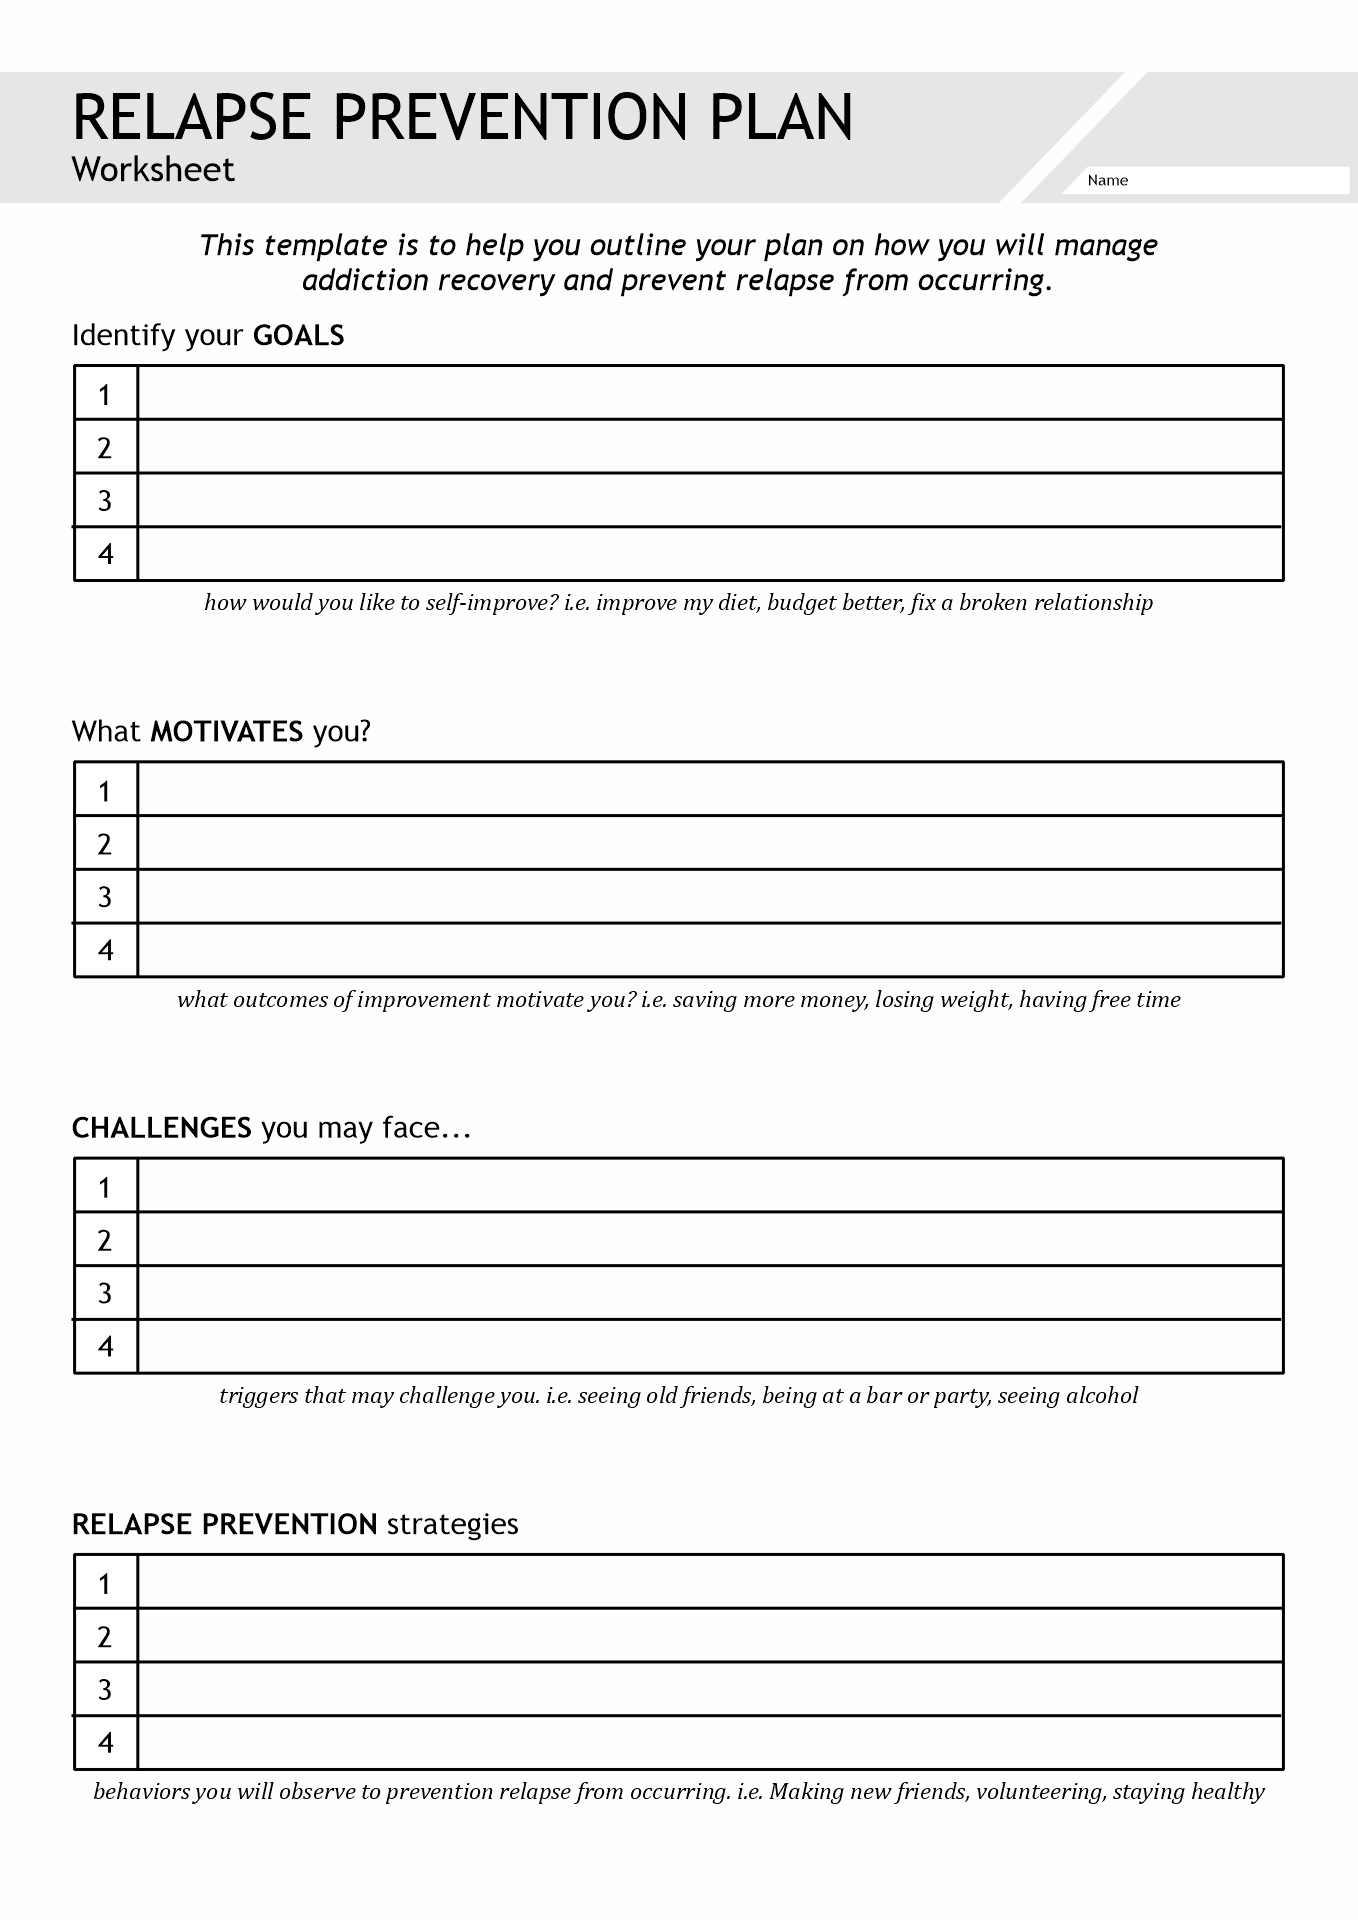 free-substance-abuse-worksheets